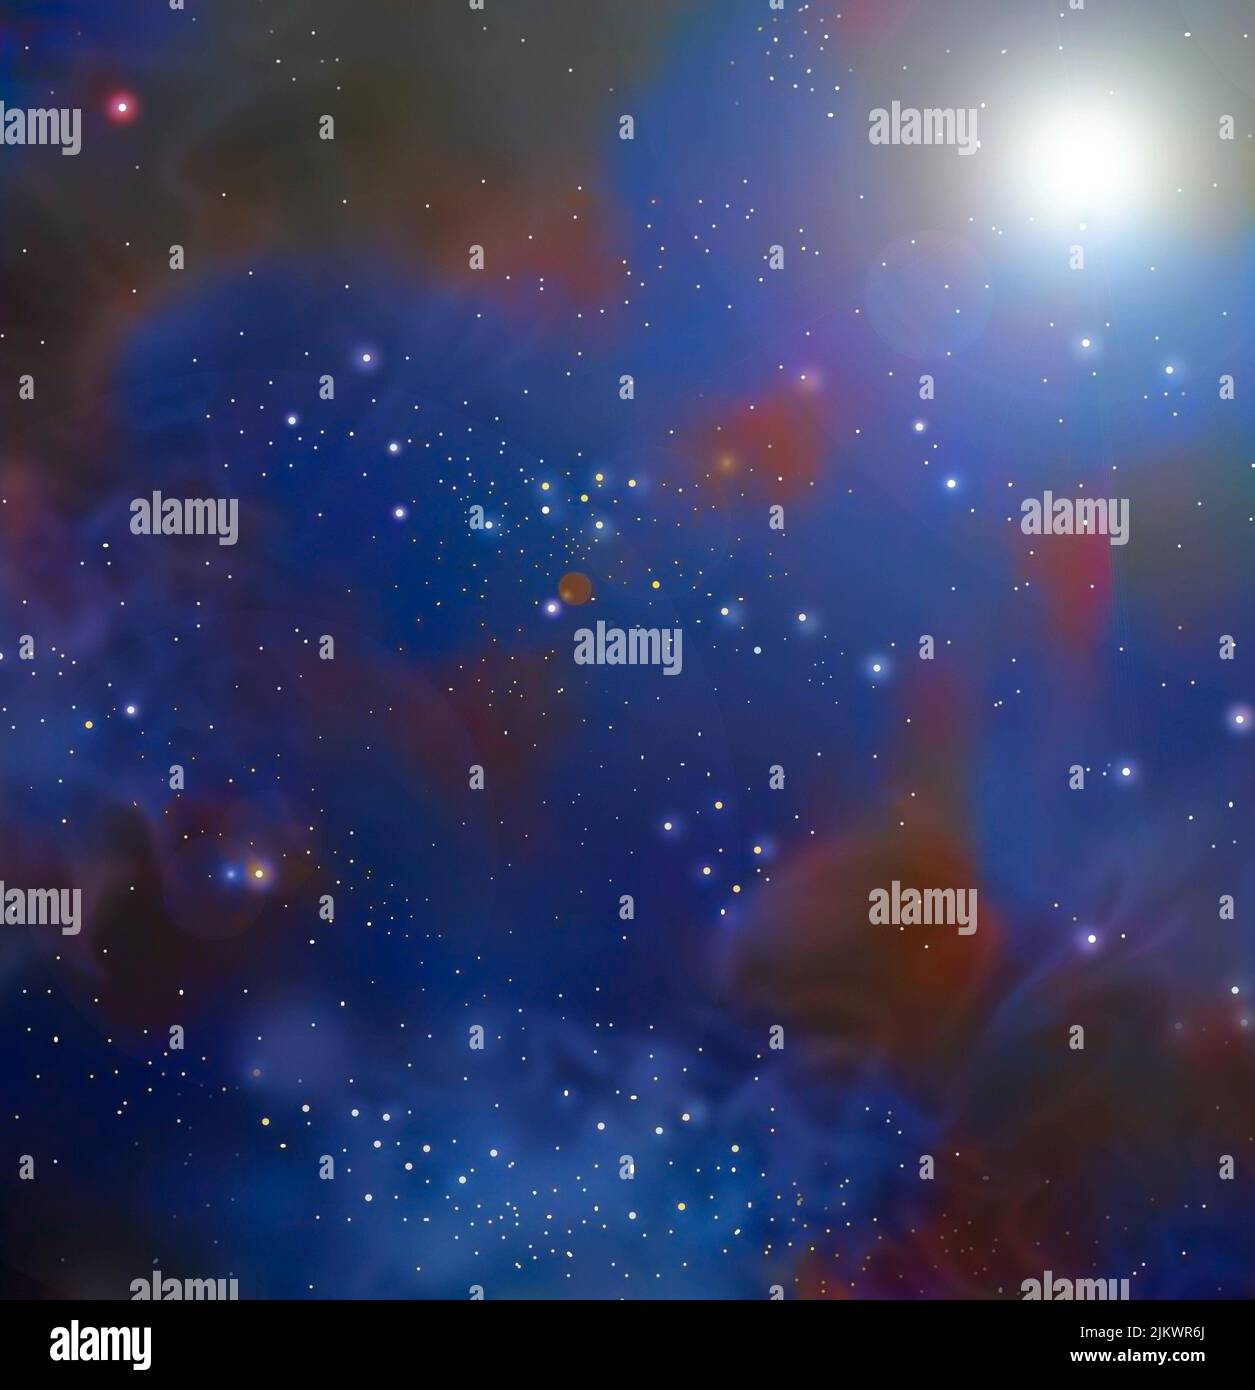 Drawing of a starry background representing space. Stock Photo